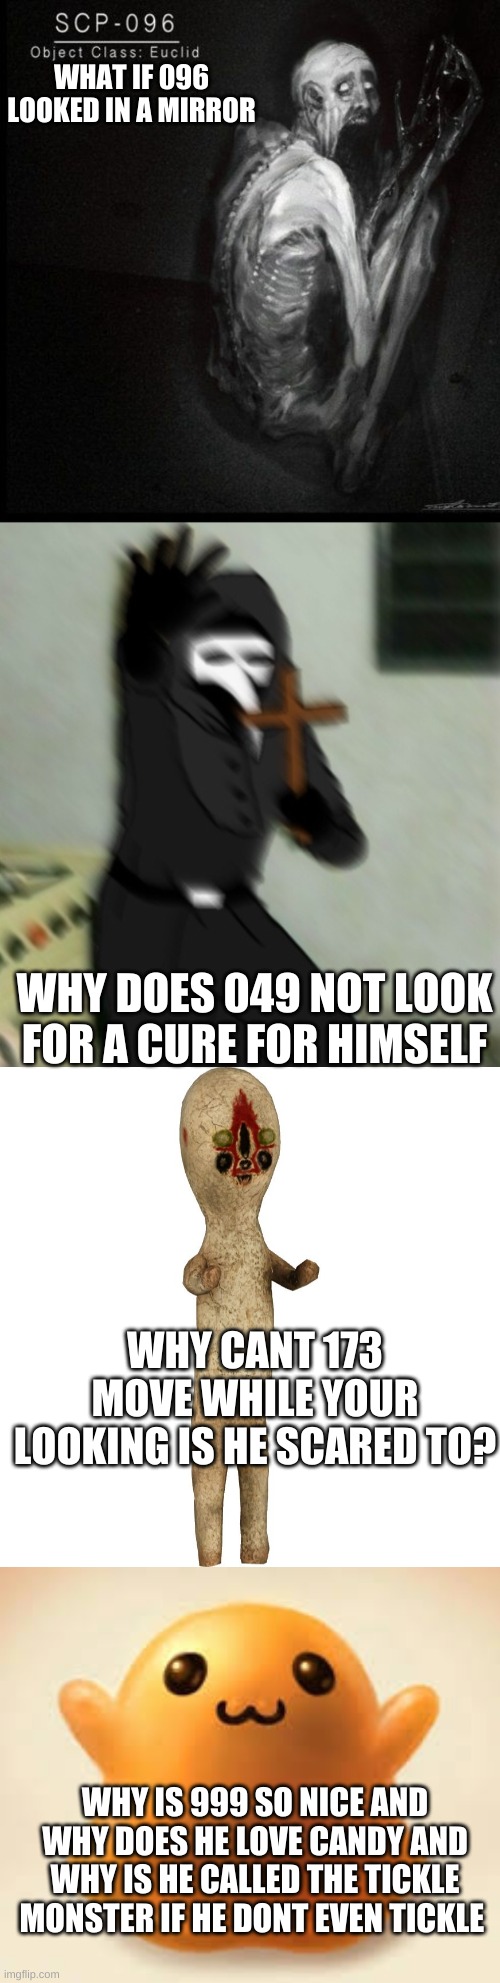 what du fuk?!? | WHAT IF 096 LOOKED IN A MIRROR; WHY DOES 049 NOT LOOK FOR A CURE FOR HIMSELF; WHY CANT 173 MOVE WHILE YOUR LOOKING IS HE SCARED TO? WHY IS 999 SO NICE AND WHY DOES HE LOVE CANDY AND WHY IS HE CALLED THE TICKLE MONSTER IF HE DONT EVEN TICKLE | image tagged in scp-096,scp 049 with cross,scp 173,scp-999 | made w/ Imgflip meme maker